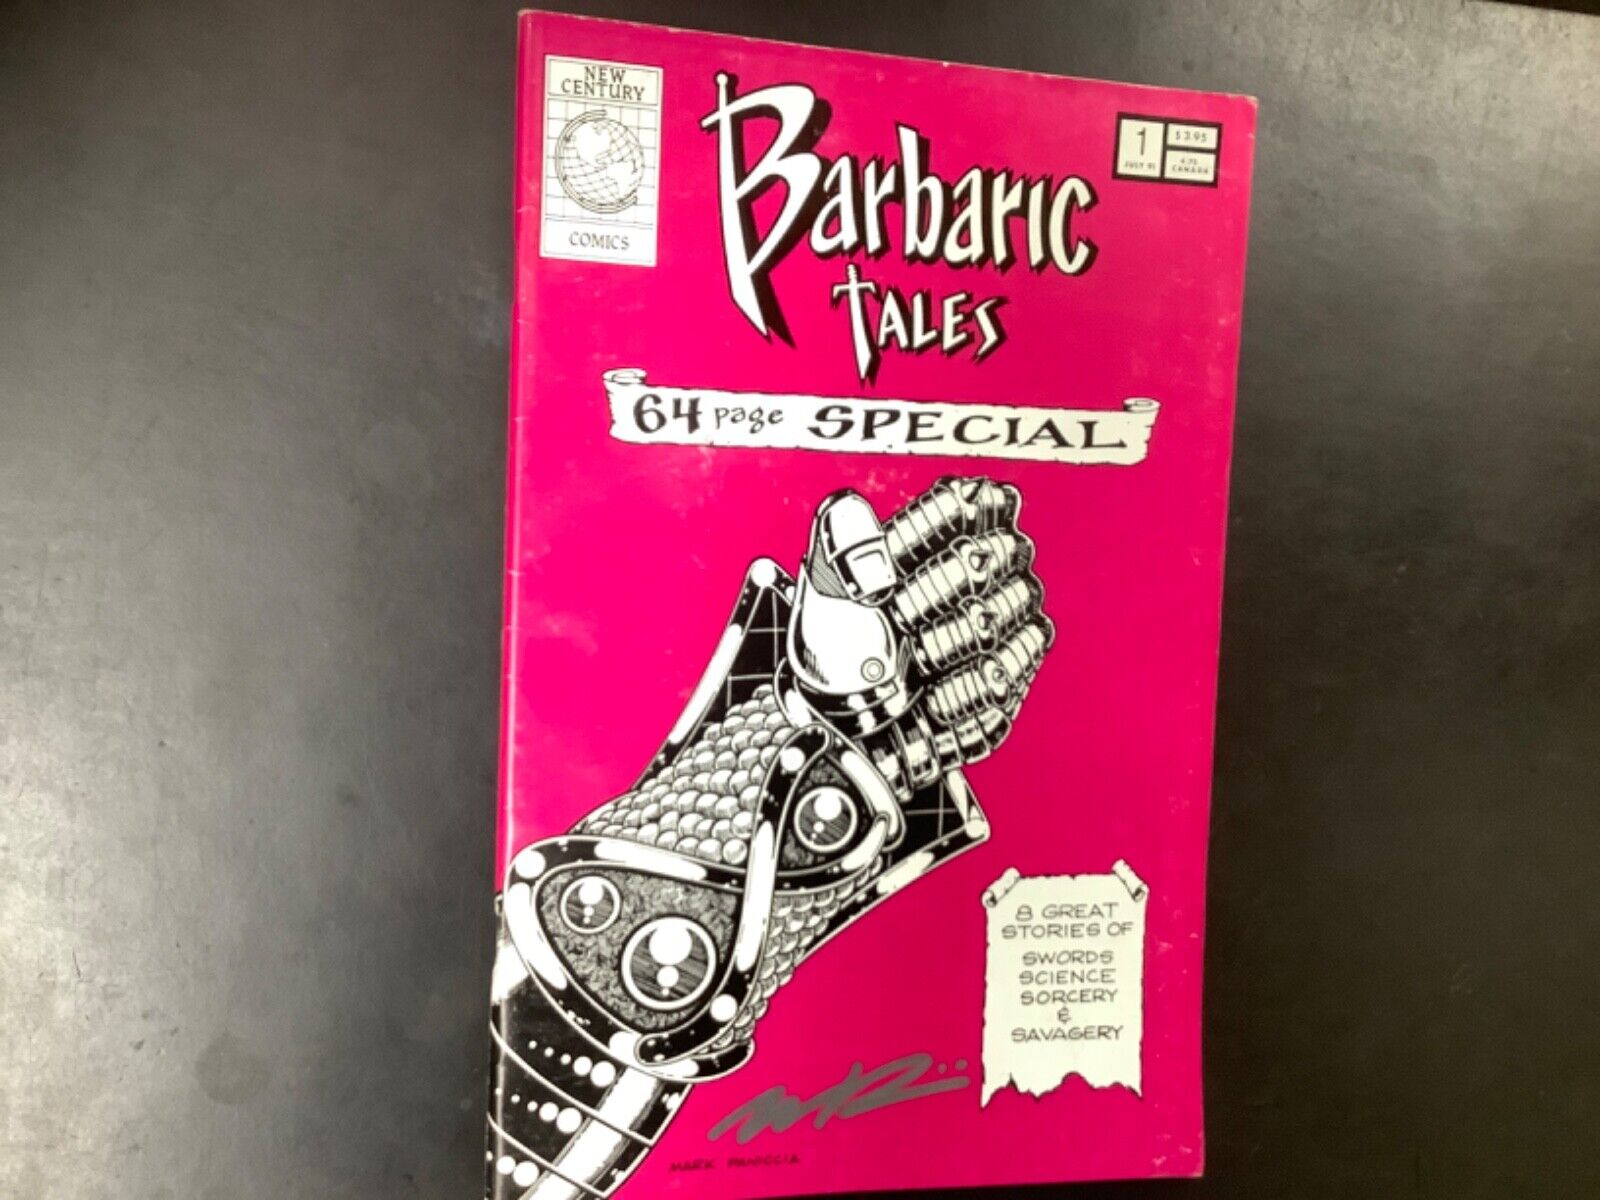 New Century Comic Barbaric Tales 64 page special - preowned see photos